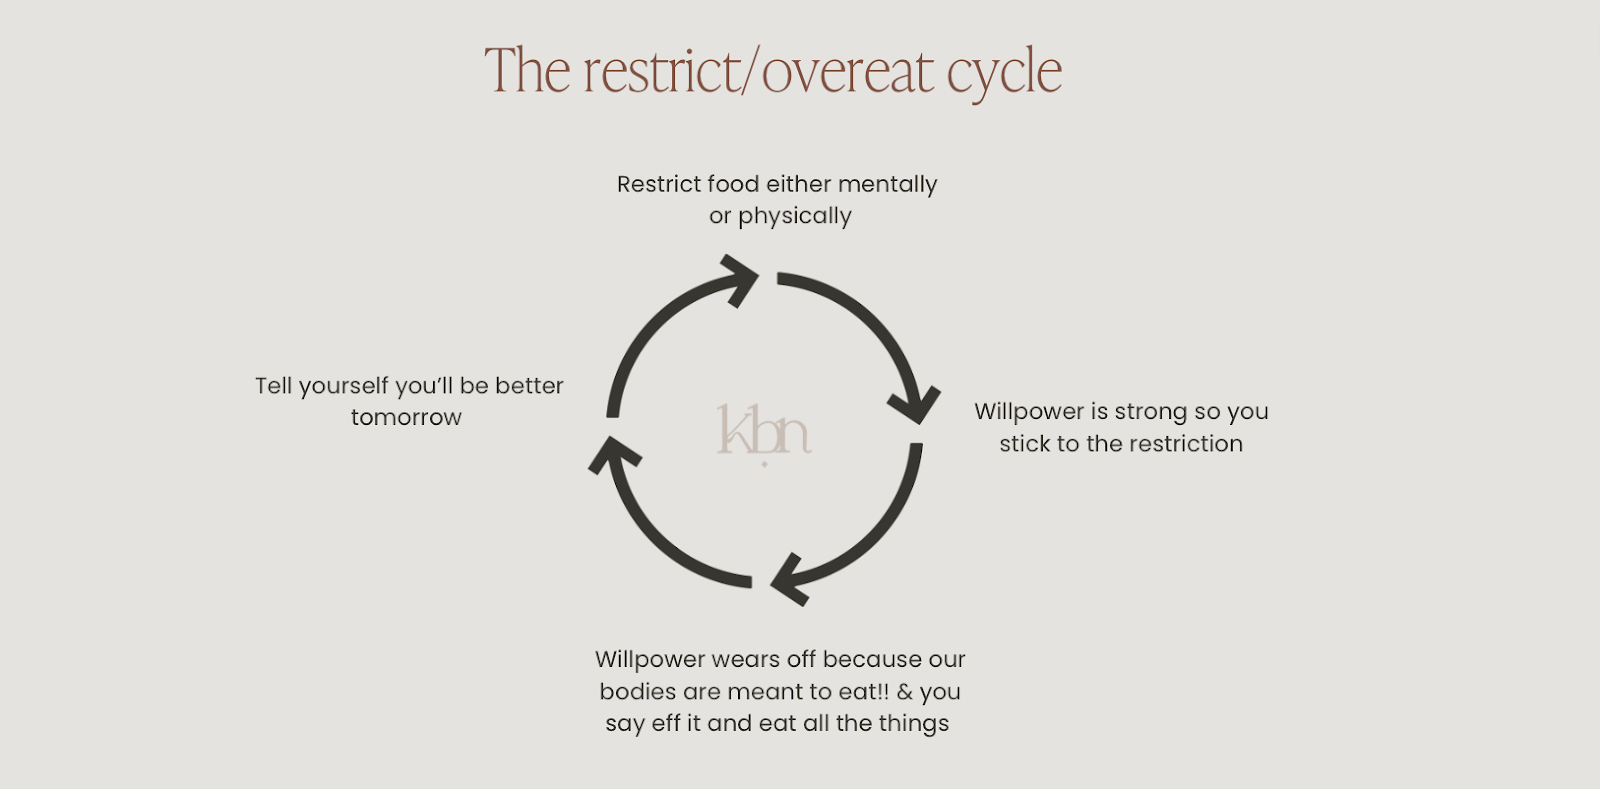 An intuitive eating nutritionist diagram of a restrict and overeat cycle